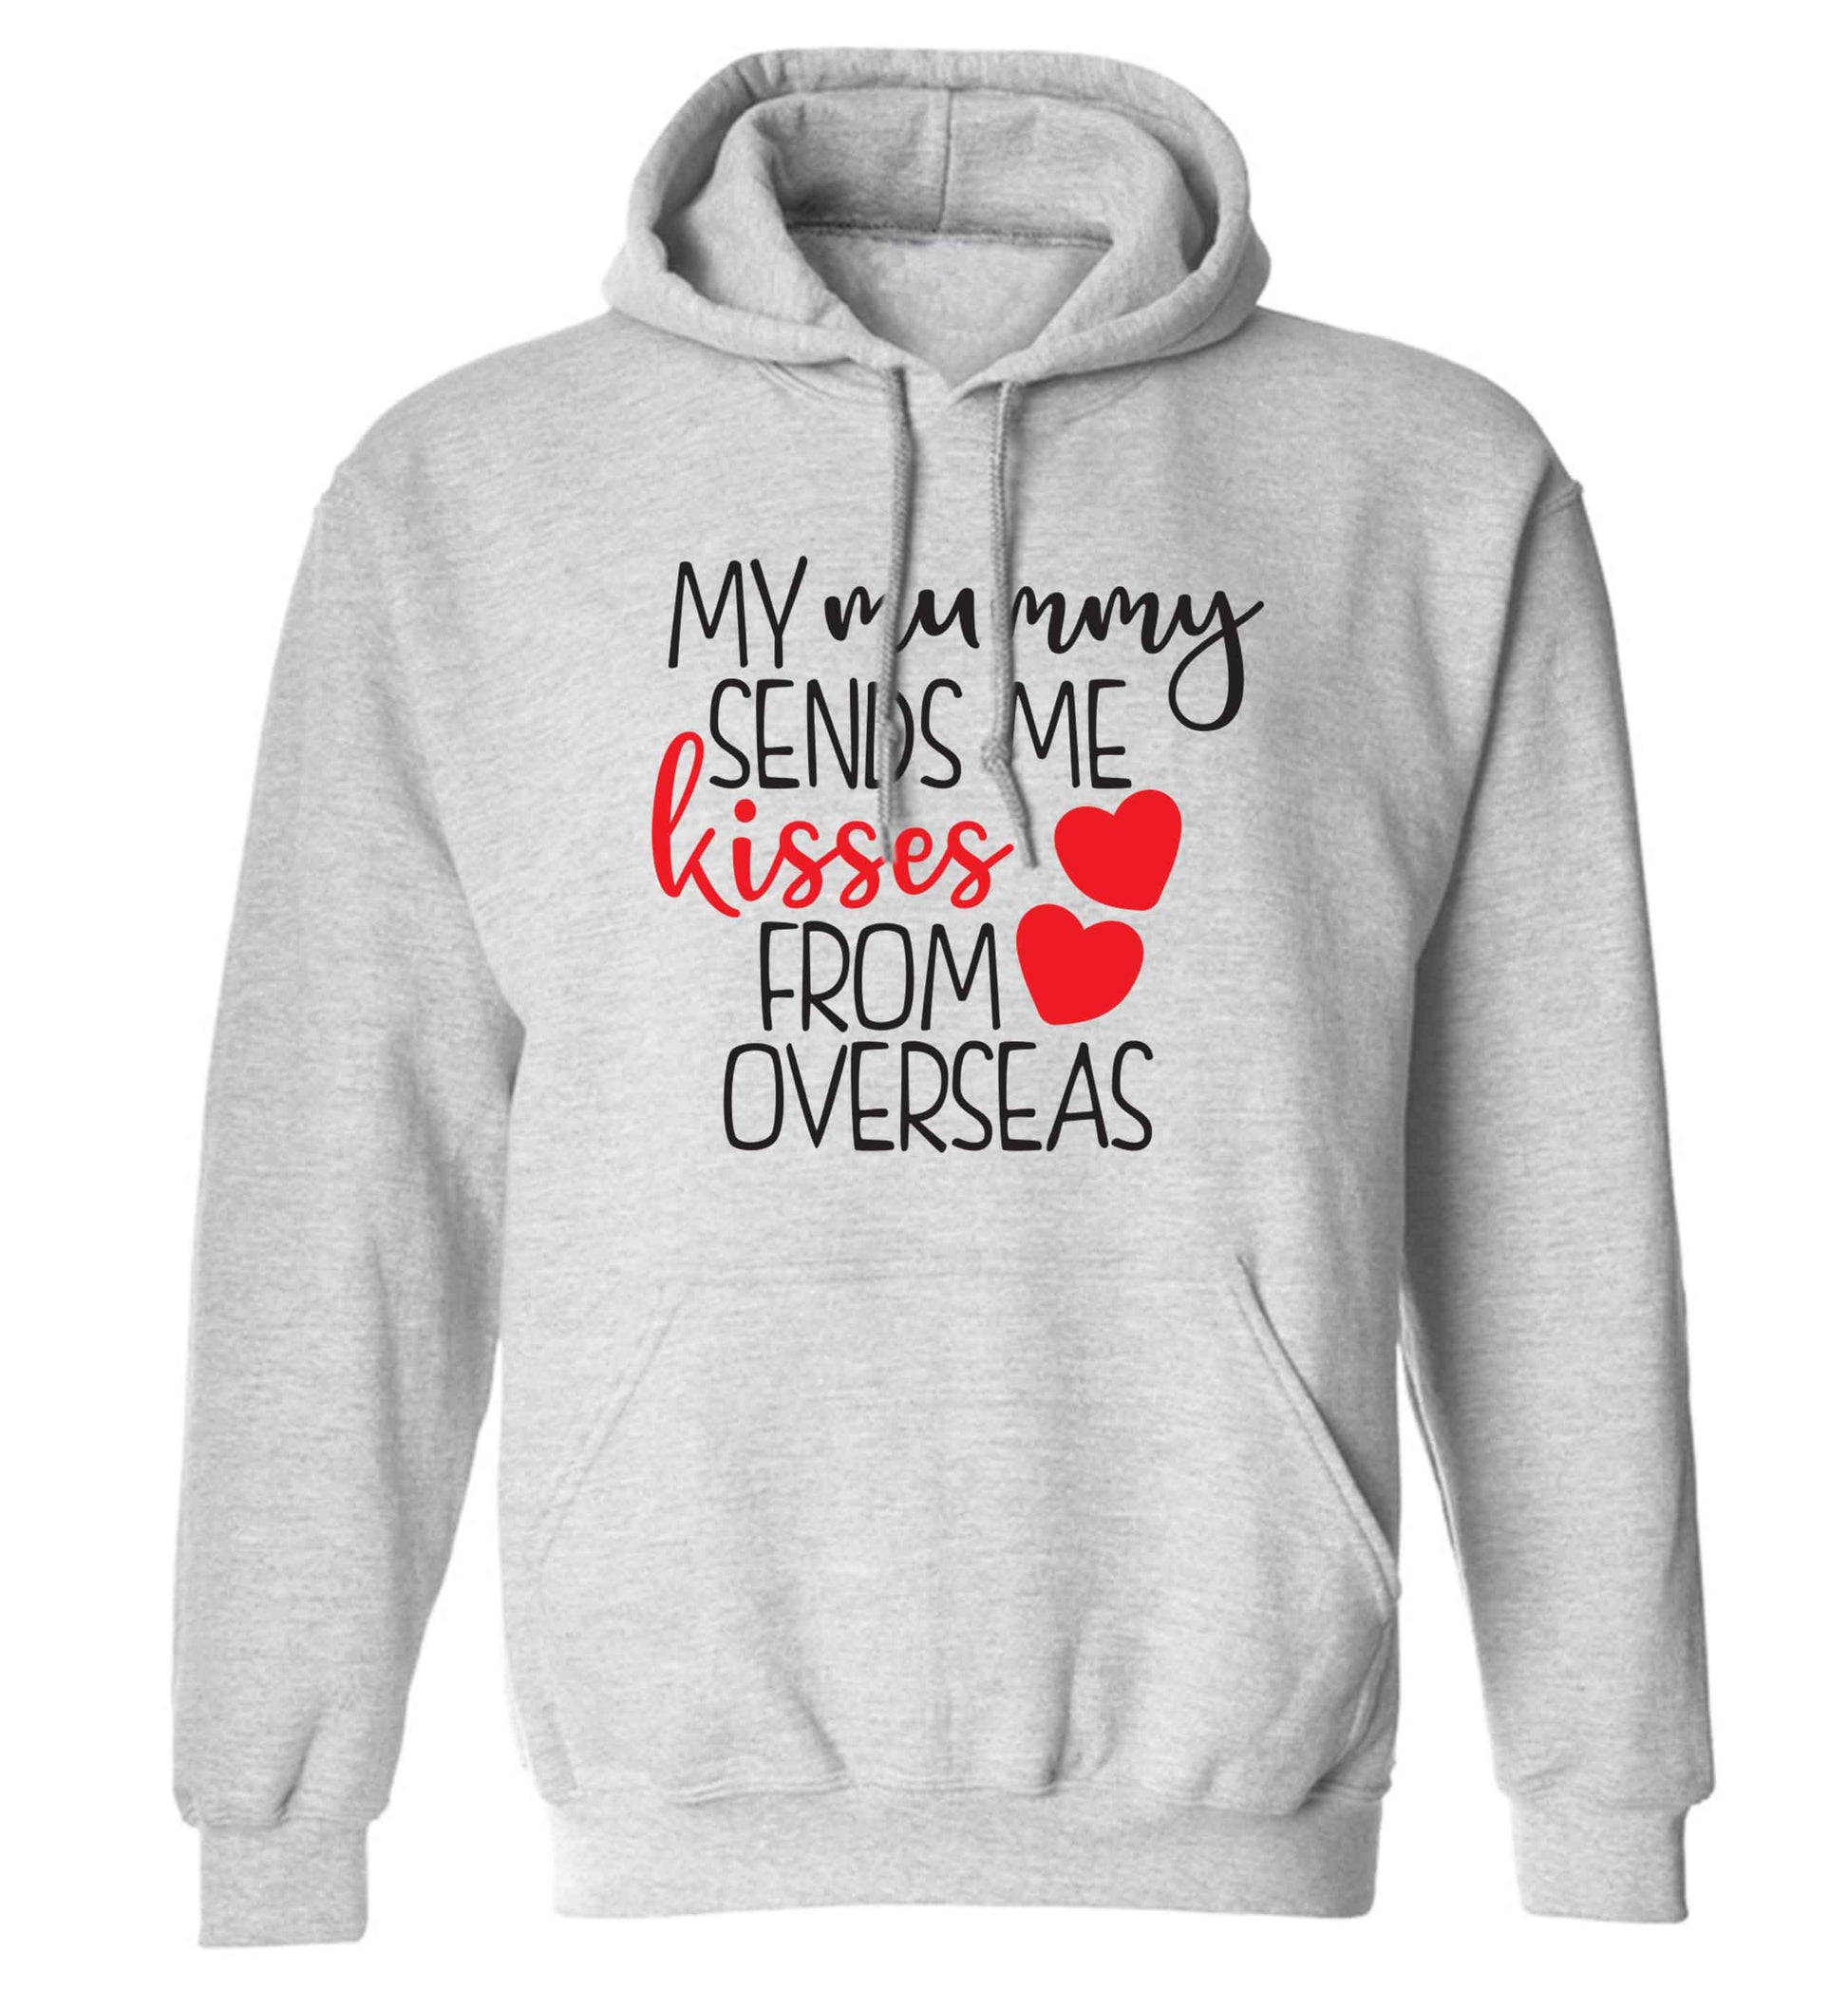 My mummy sends me kisses from overseas adults unisex grey hoodie 2XL